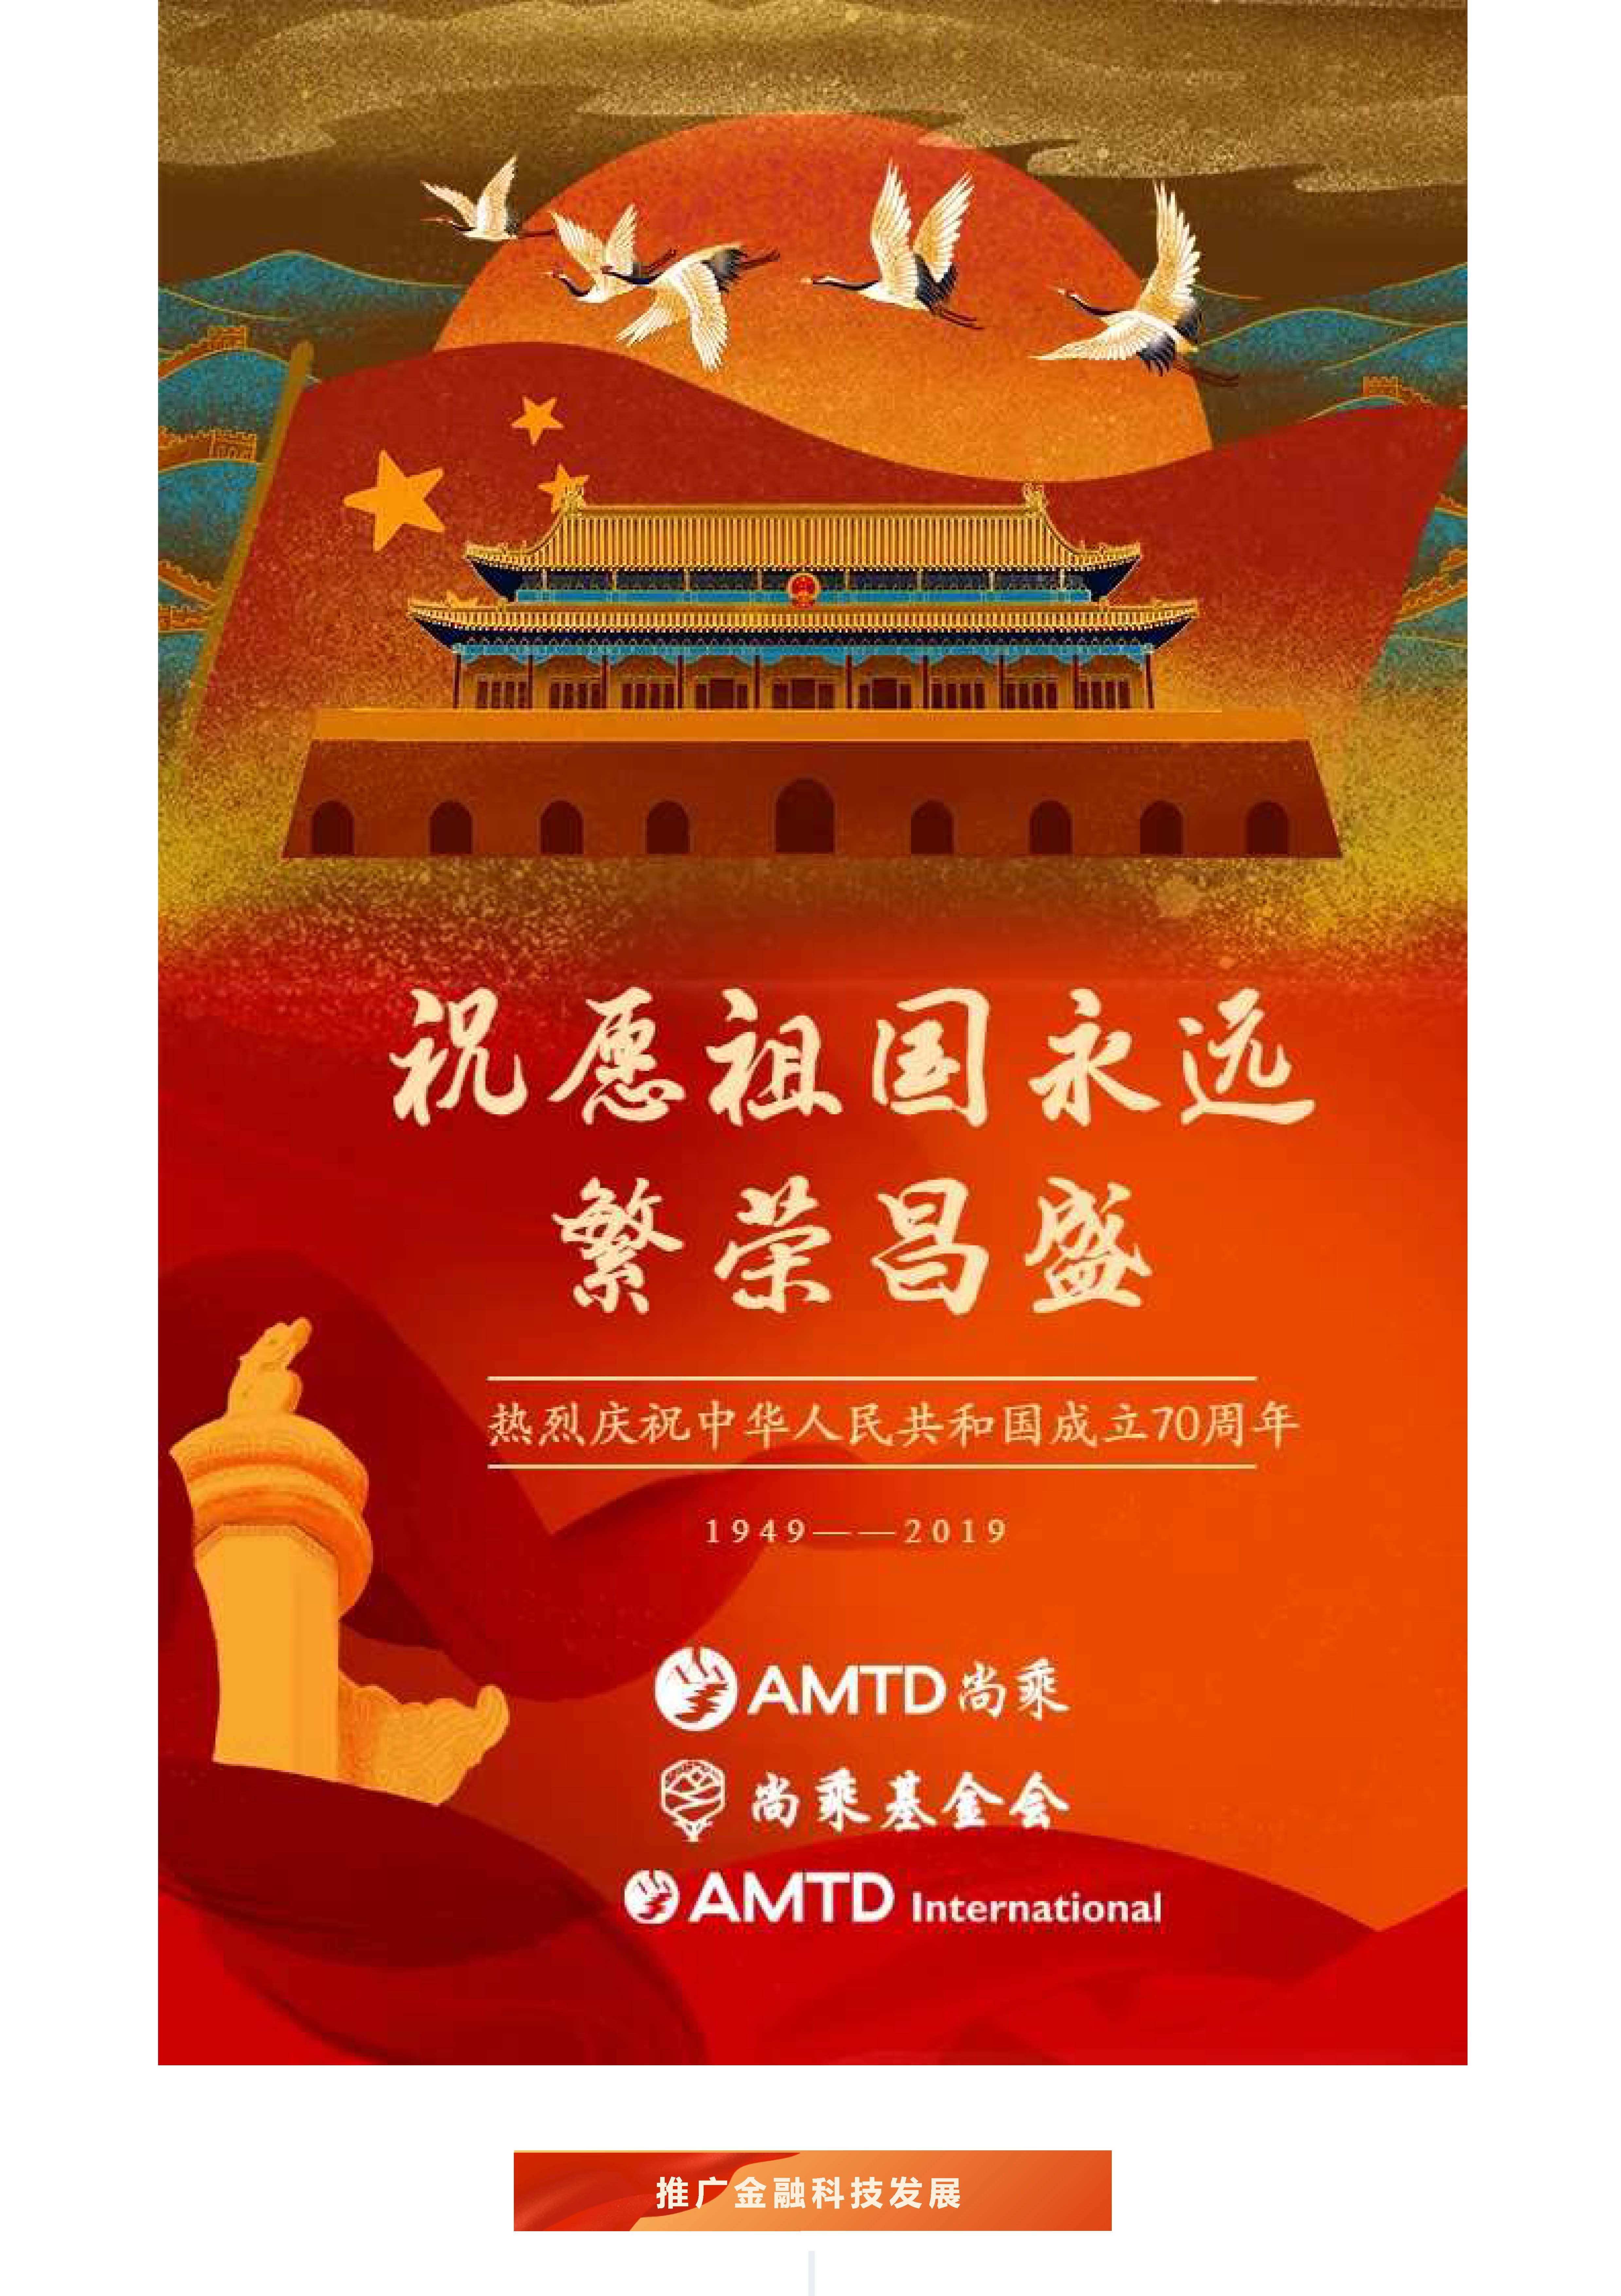 「AMTD · My Country and I」Vol.2 | To build a better Hong Kong and make the Pearl of the Orient shine forever